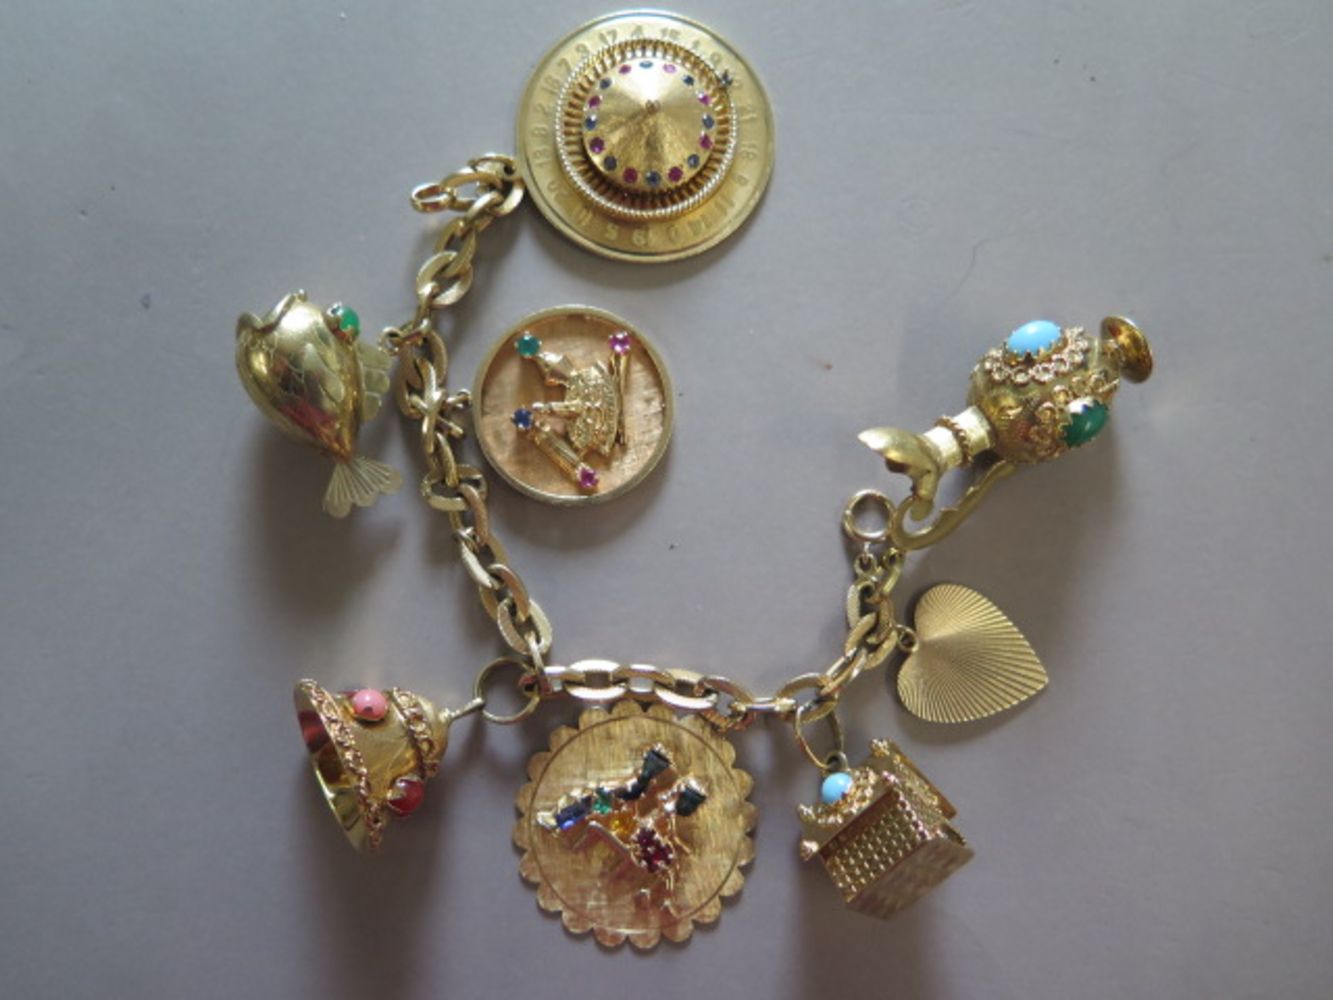 Jewellery, Watches, Silver, Coins, Antiques & Collectables